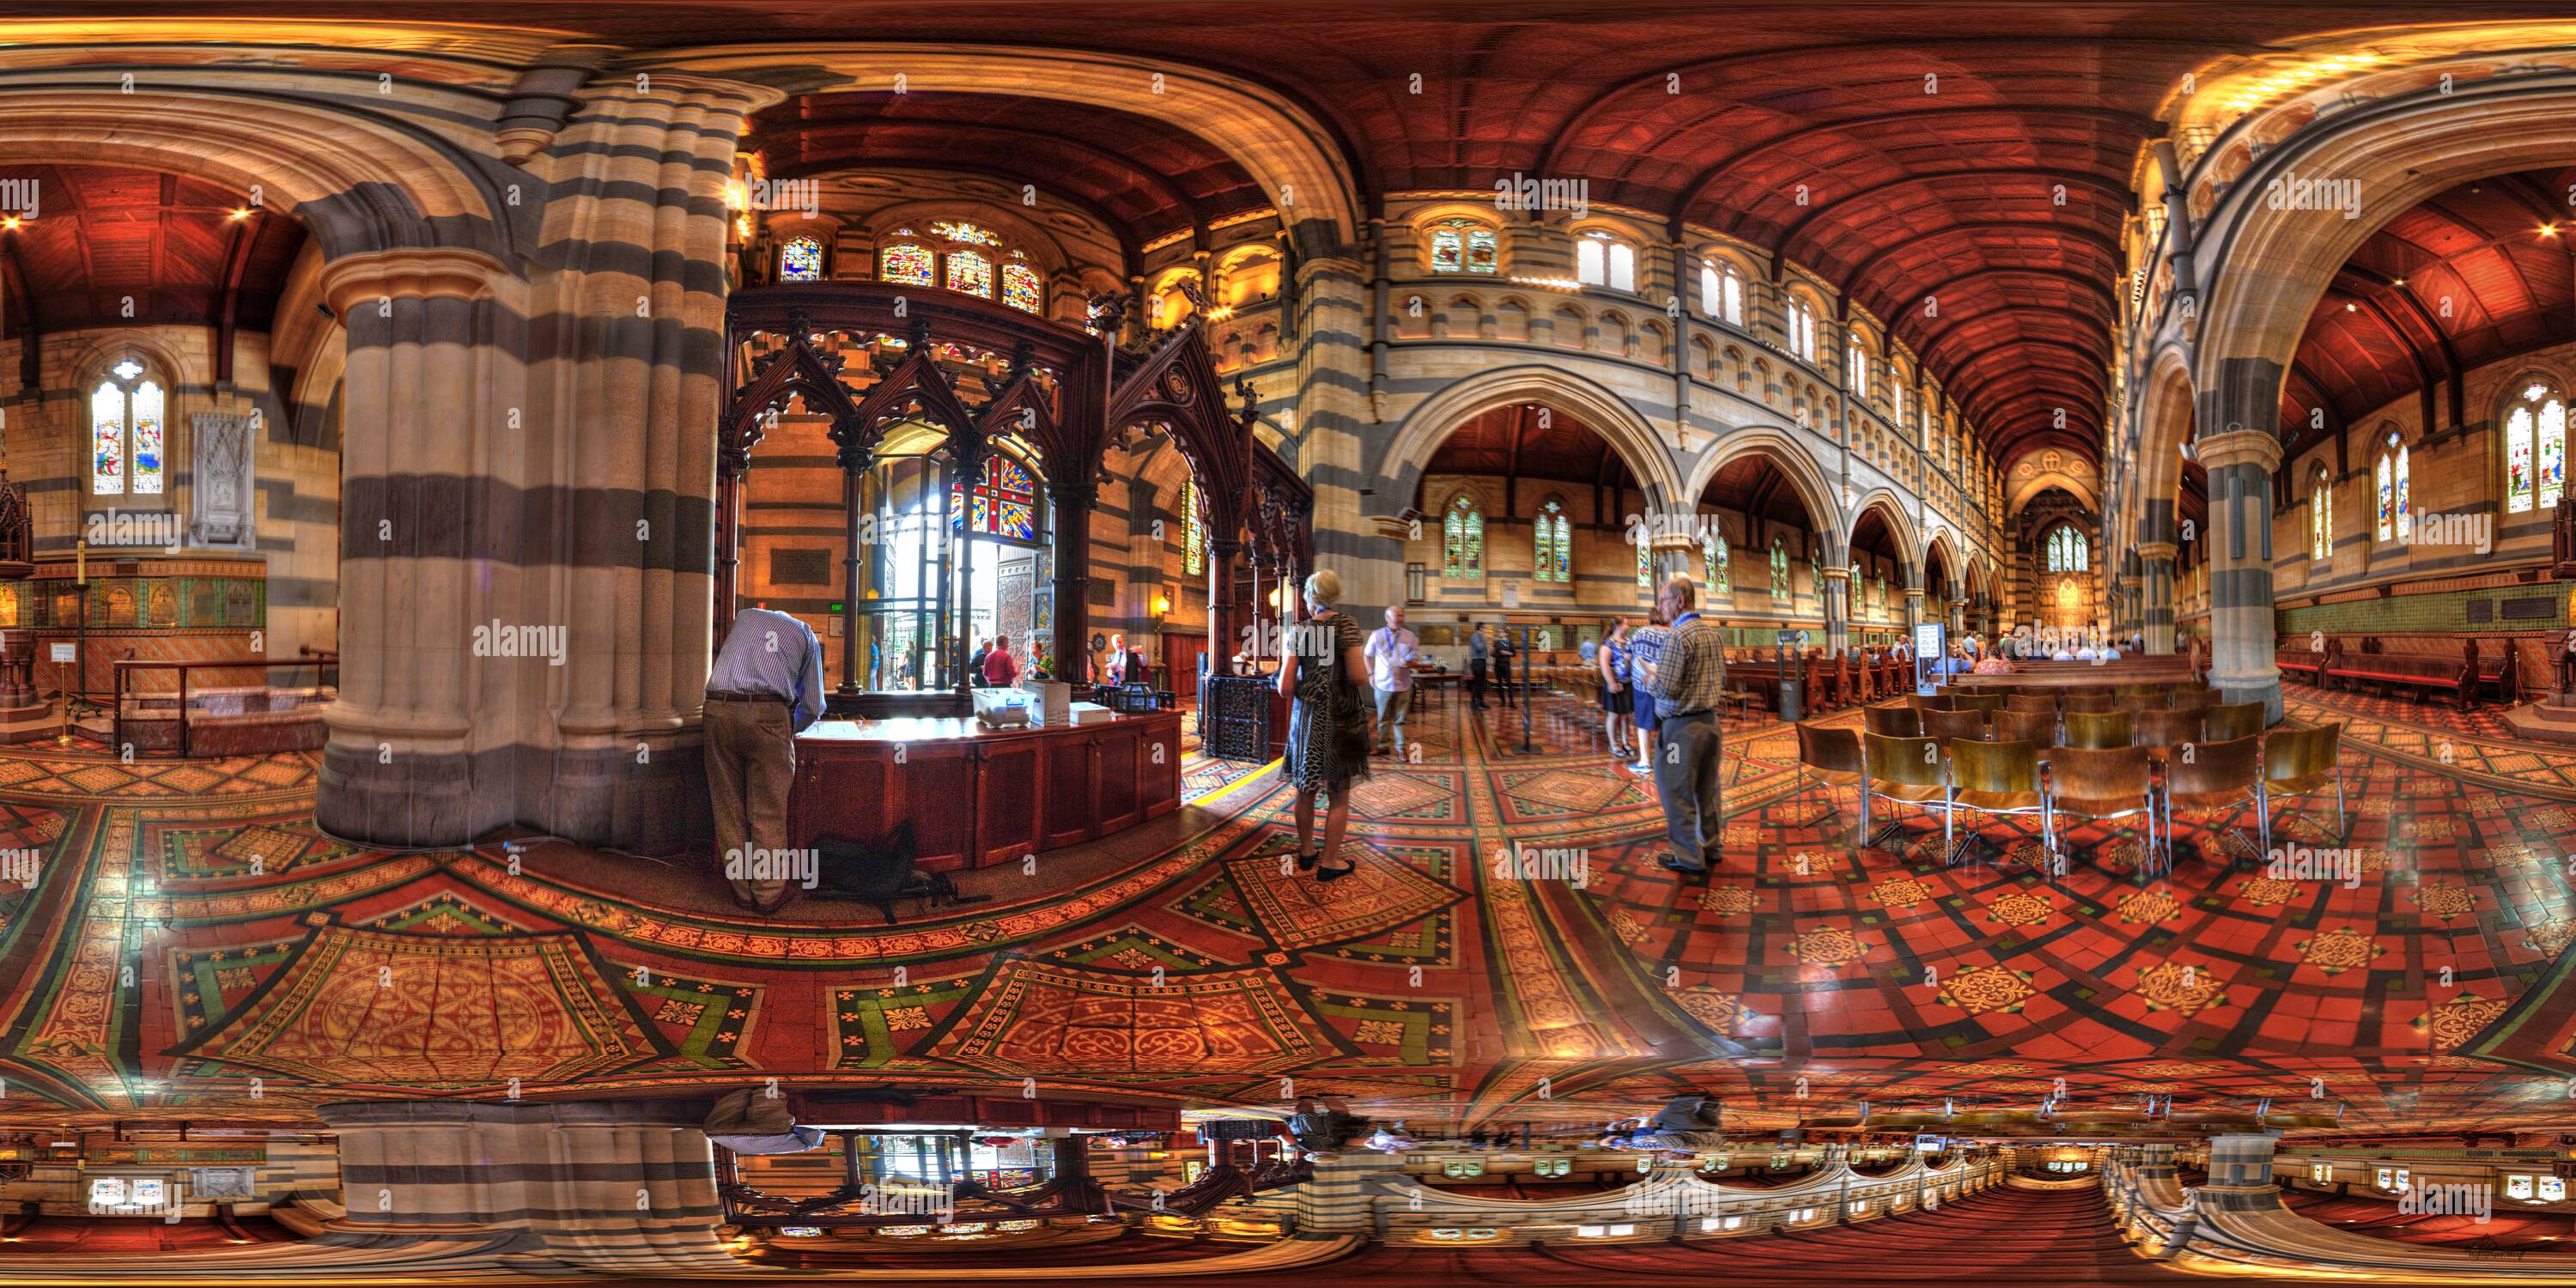 360° View Of Inside St Pauls Cathedral Melbourne Alamy